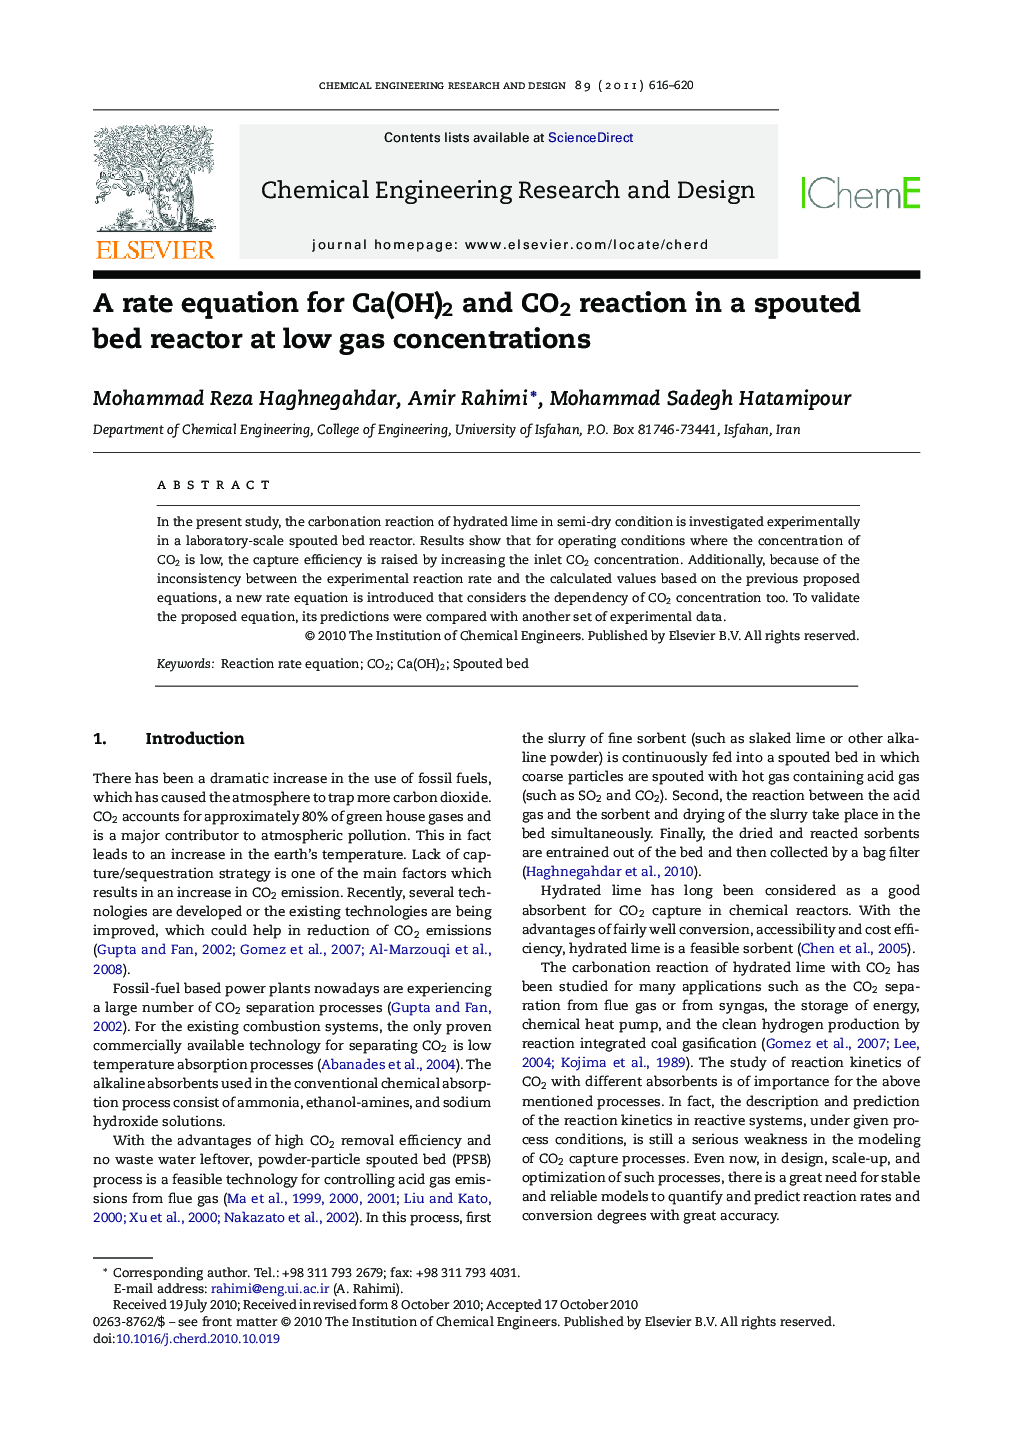 A rate equation for Ca(OH)2 and CO2 reaction in a spouted bed reactor at low gas concentrations